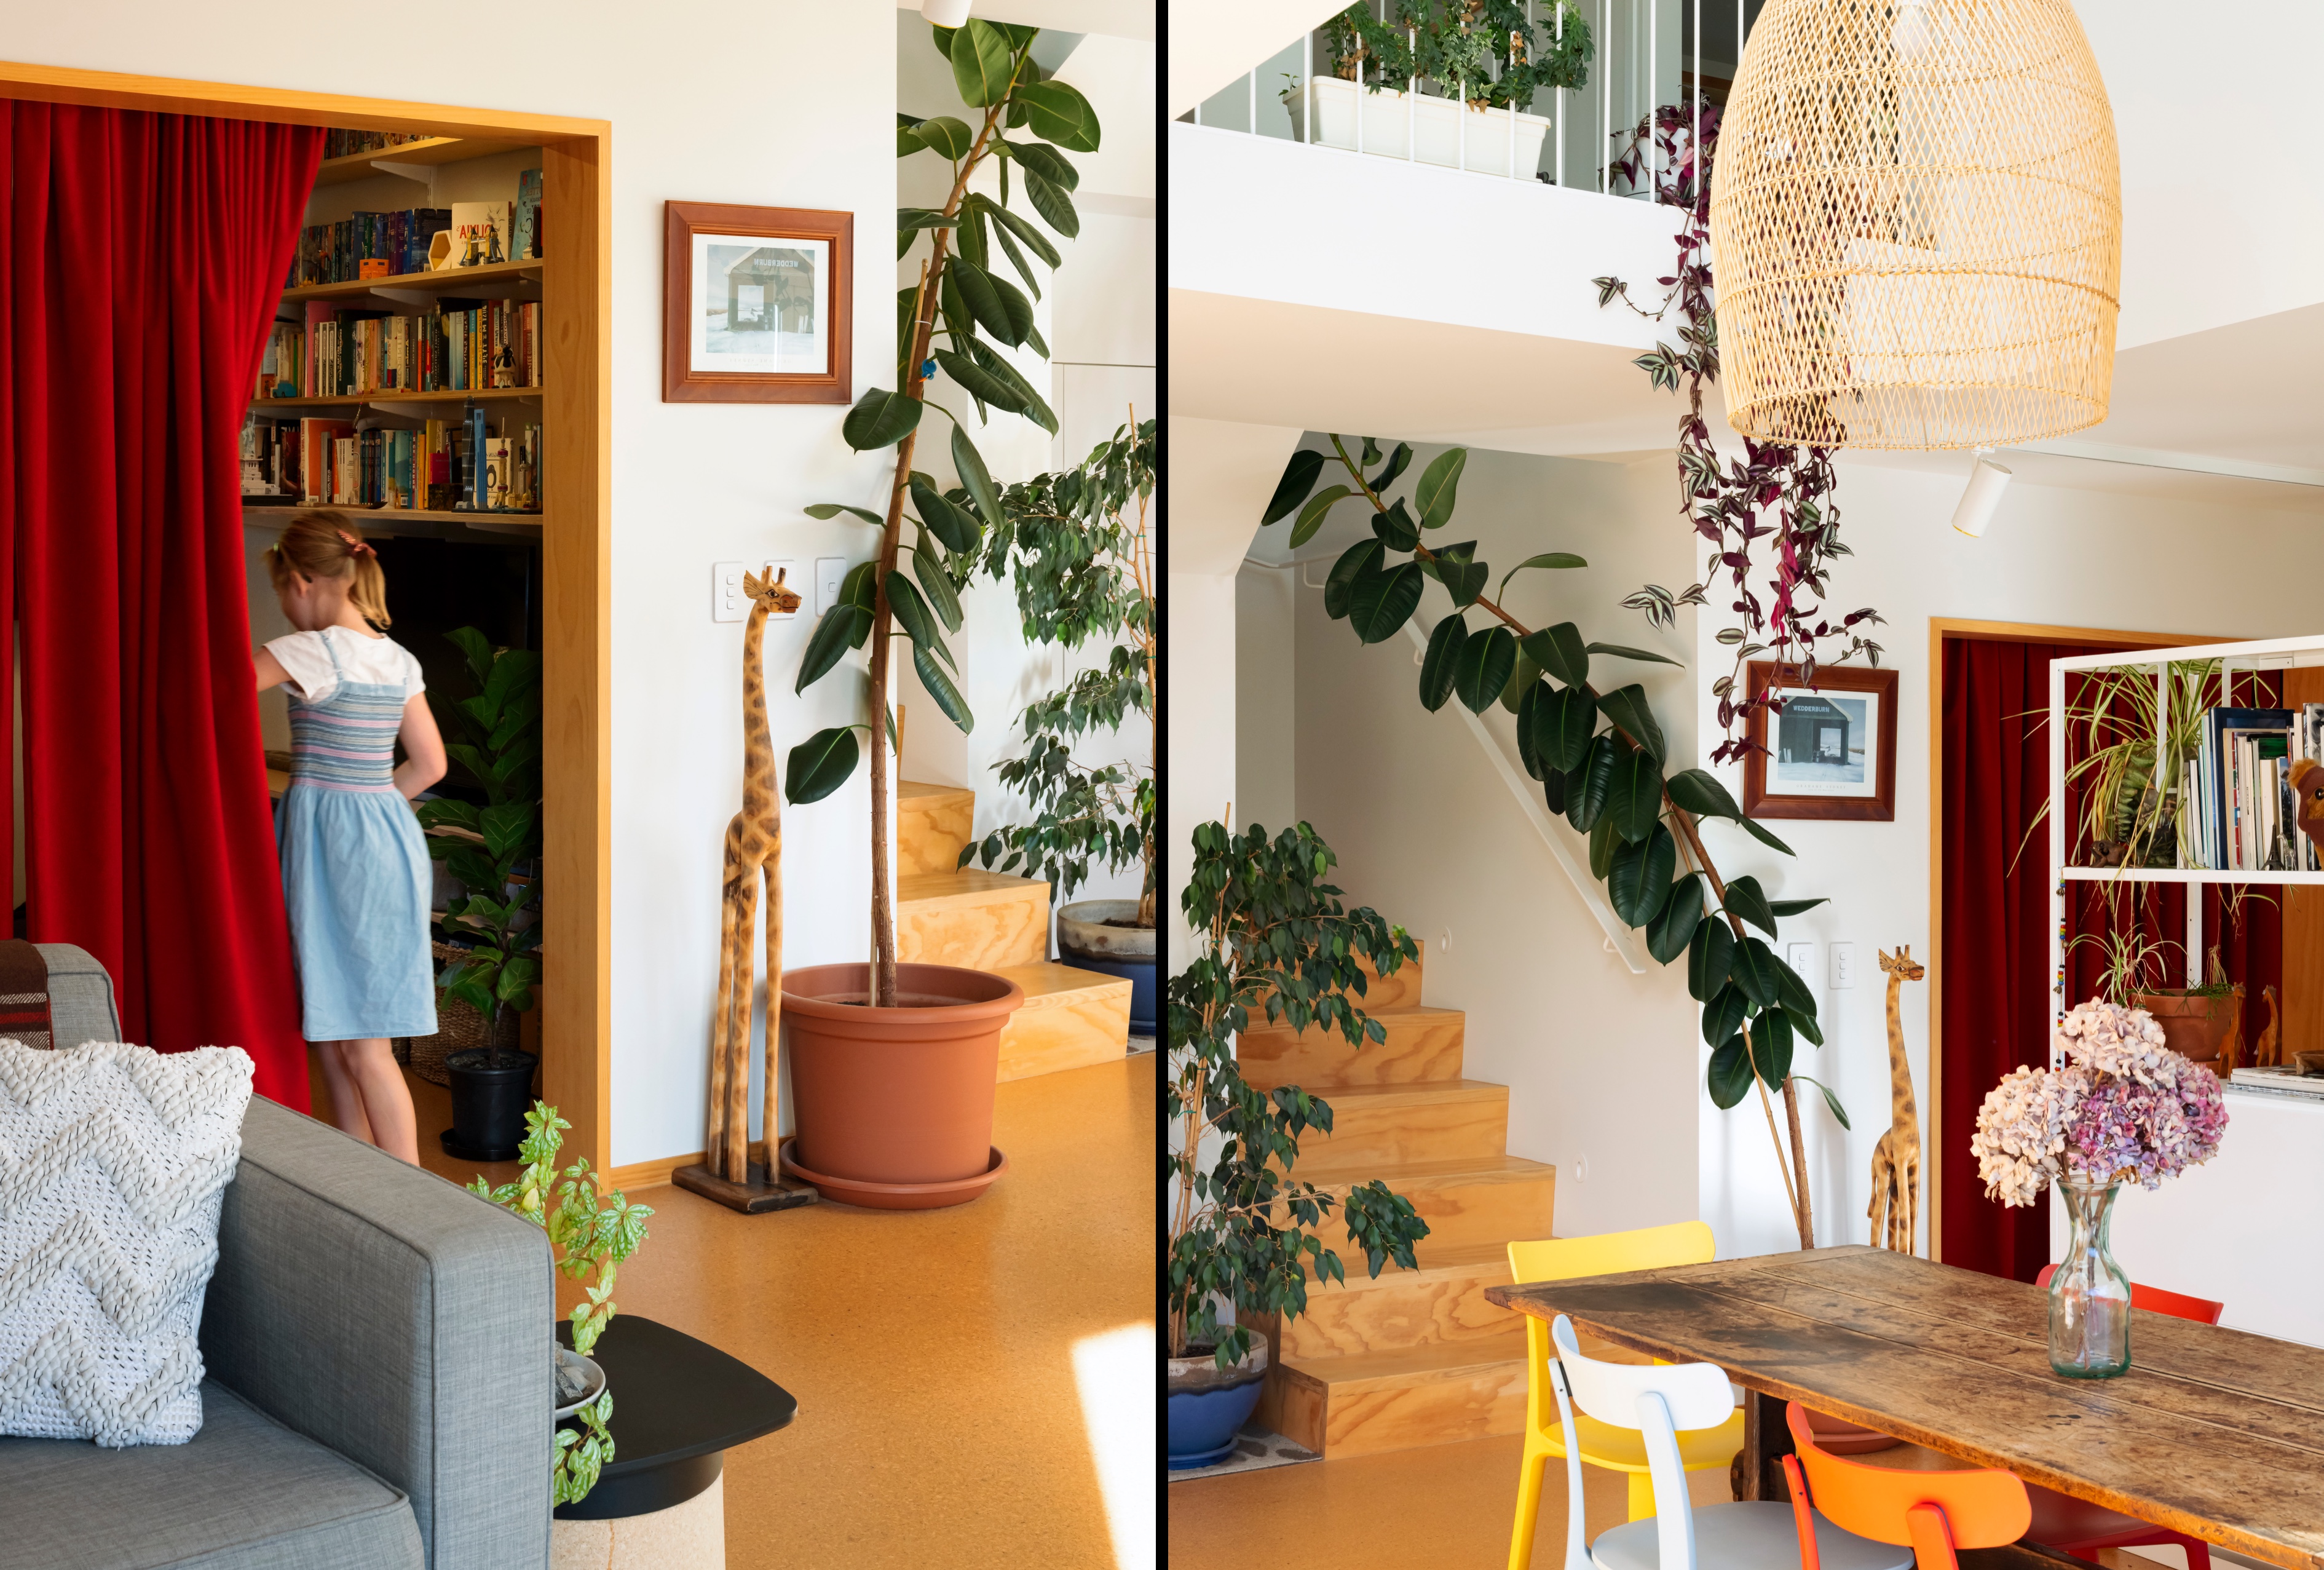 Split image. Left side a girl moves from a living space to another room by pulling aside a velvet curtain. Right side shows stiarcase, cork flooring, and interior greenery